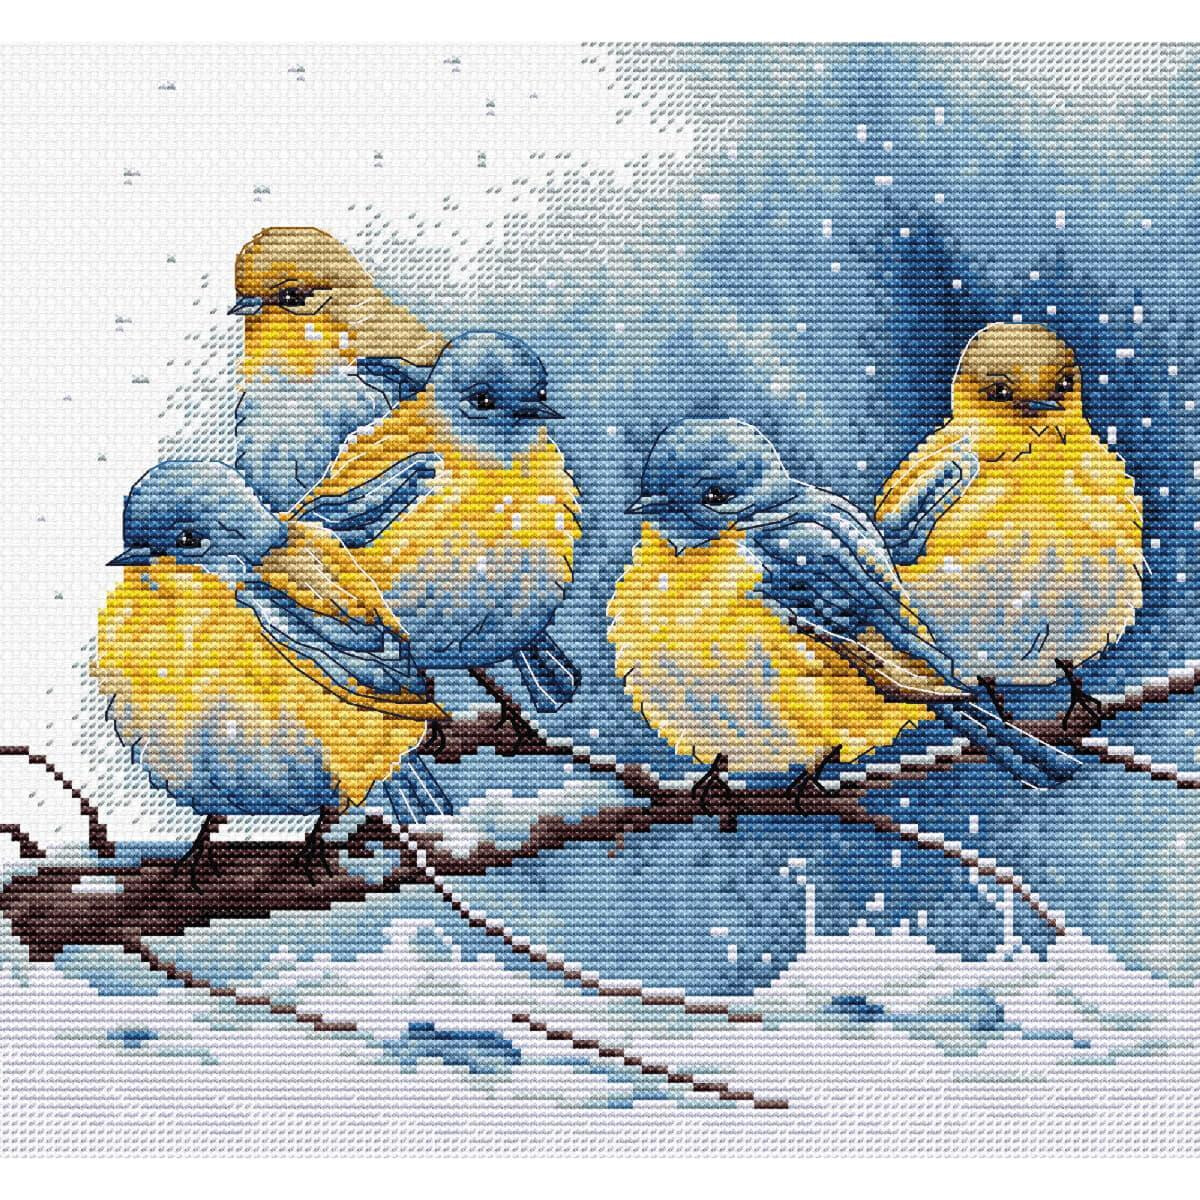 An embroidered picture shows five little birds with blue...